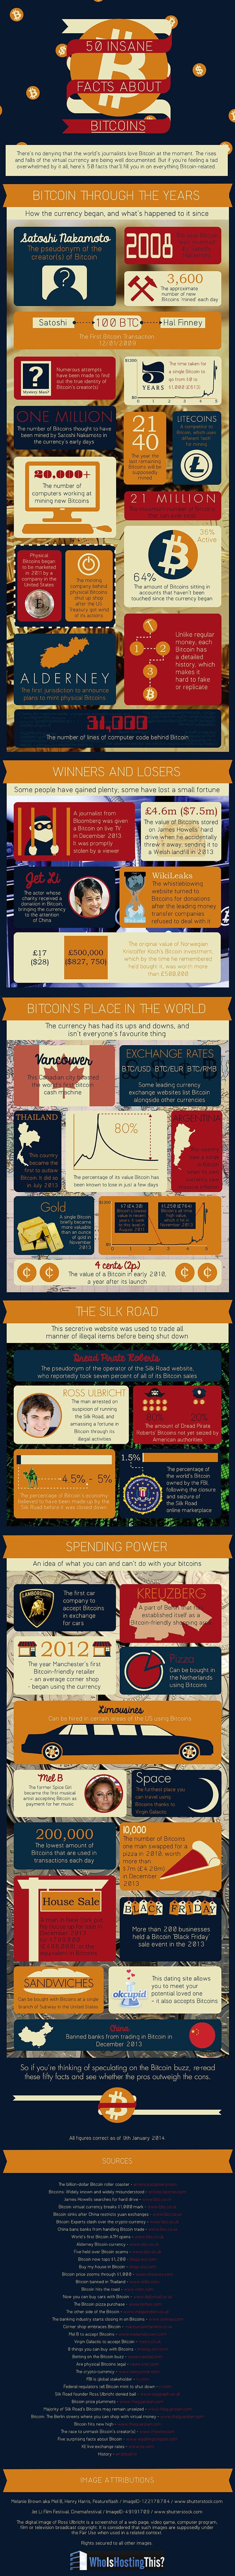 50 Insane Bitcoin Facts Infographic